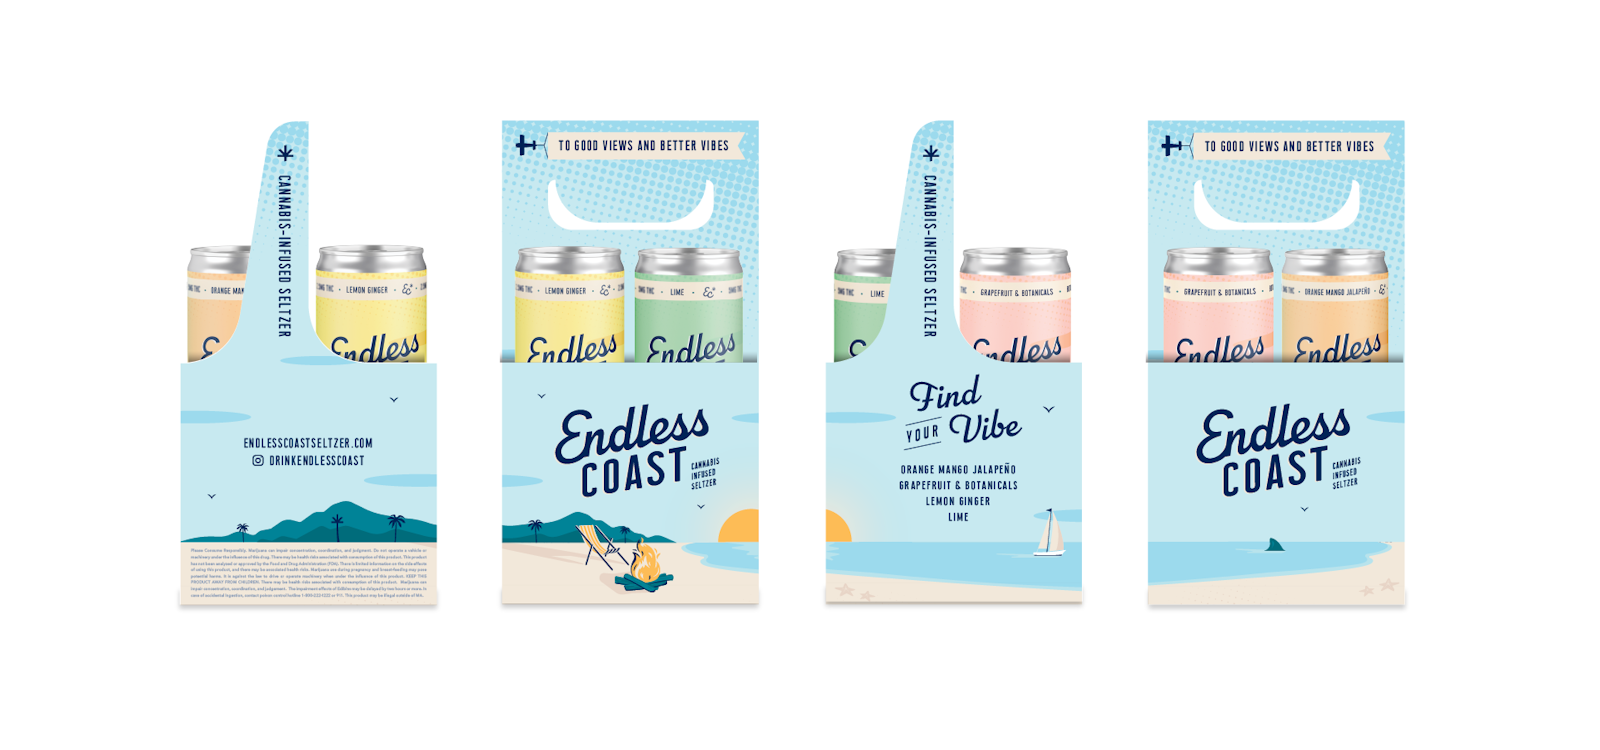 The Endless Coast brand packaging design in Four Pack design examples.